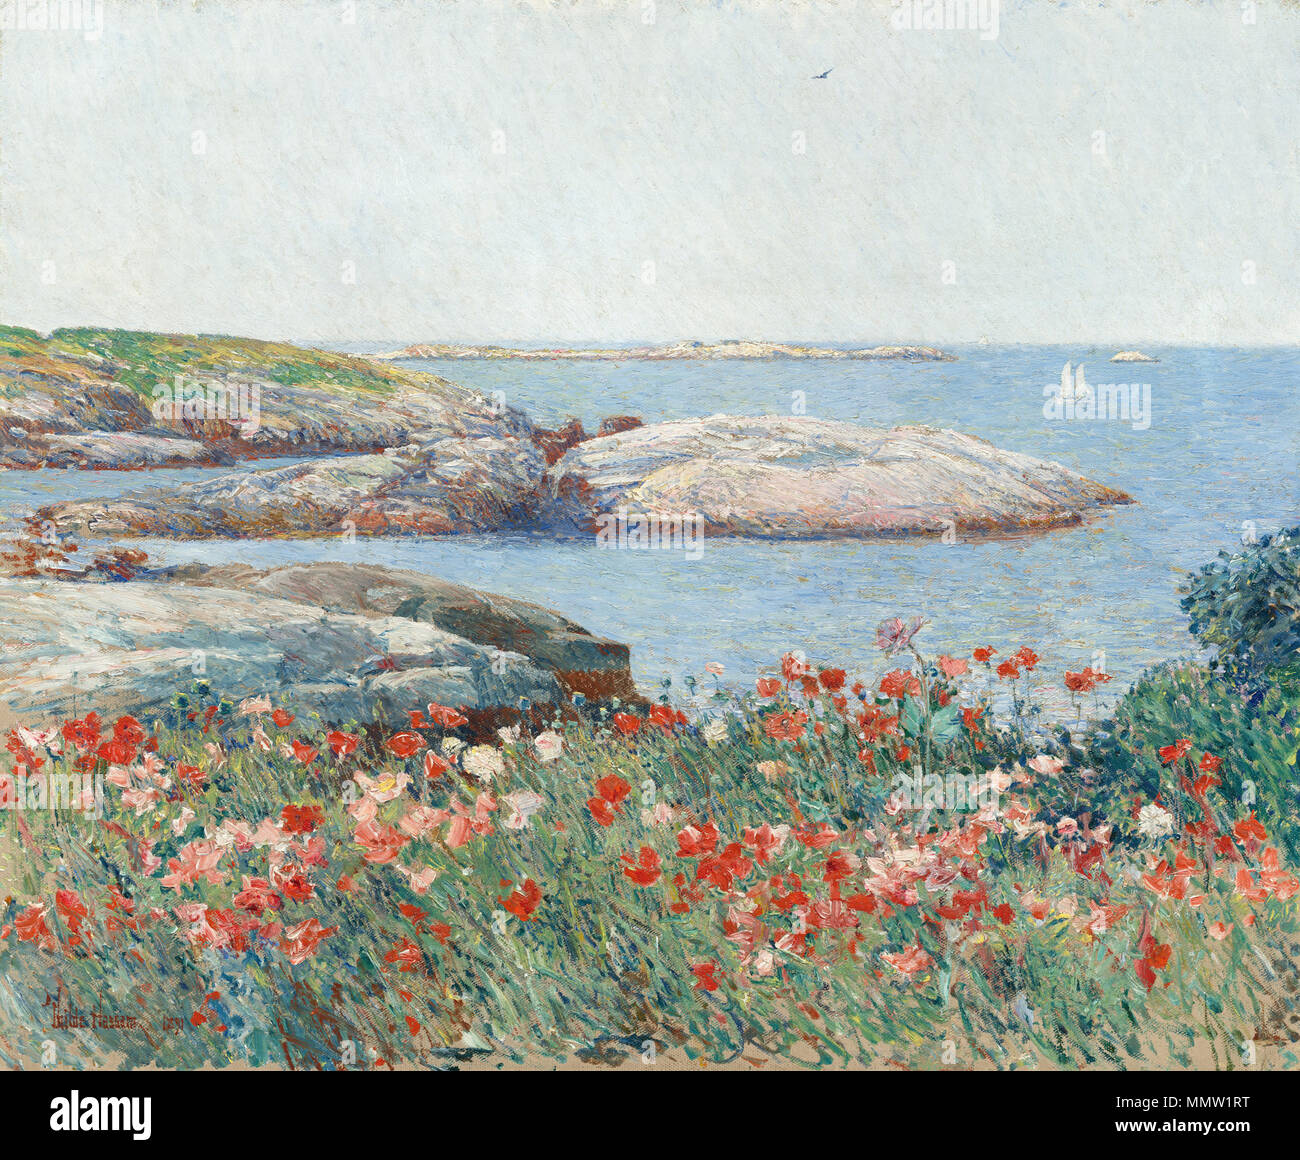 .  English: Childe Hassam's painting Poppies, Isles of Shoals, from 1891. Hanging at the National Gallery of Art in Washington D.C. Svenska: Childe Hassams målning Poppies, Isles of Shoals, från 1891.  Painting; oil on canvas; overall: 50.2 x 61 cm (19 3/4 x 24 in.) framed: 73.5 x 83.8 x 6.7 cm (28 15/16 x 33 x 2 5/8 in.); Childe Hassam, Poppies, Isles of Shoals, 1891 Stock Photo